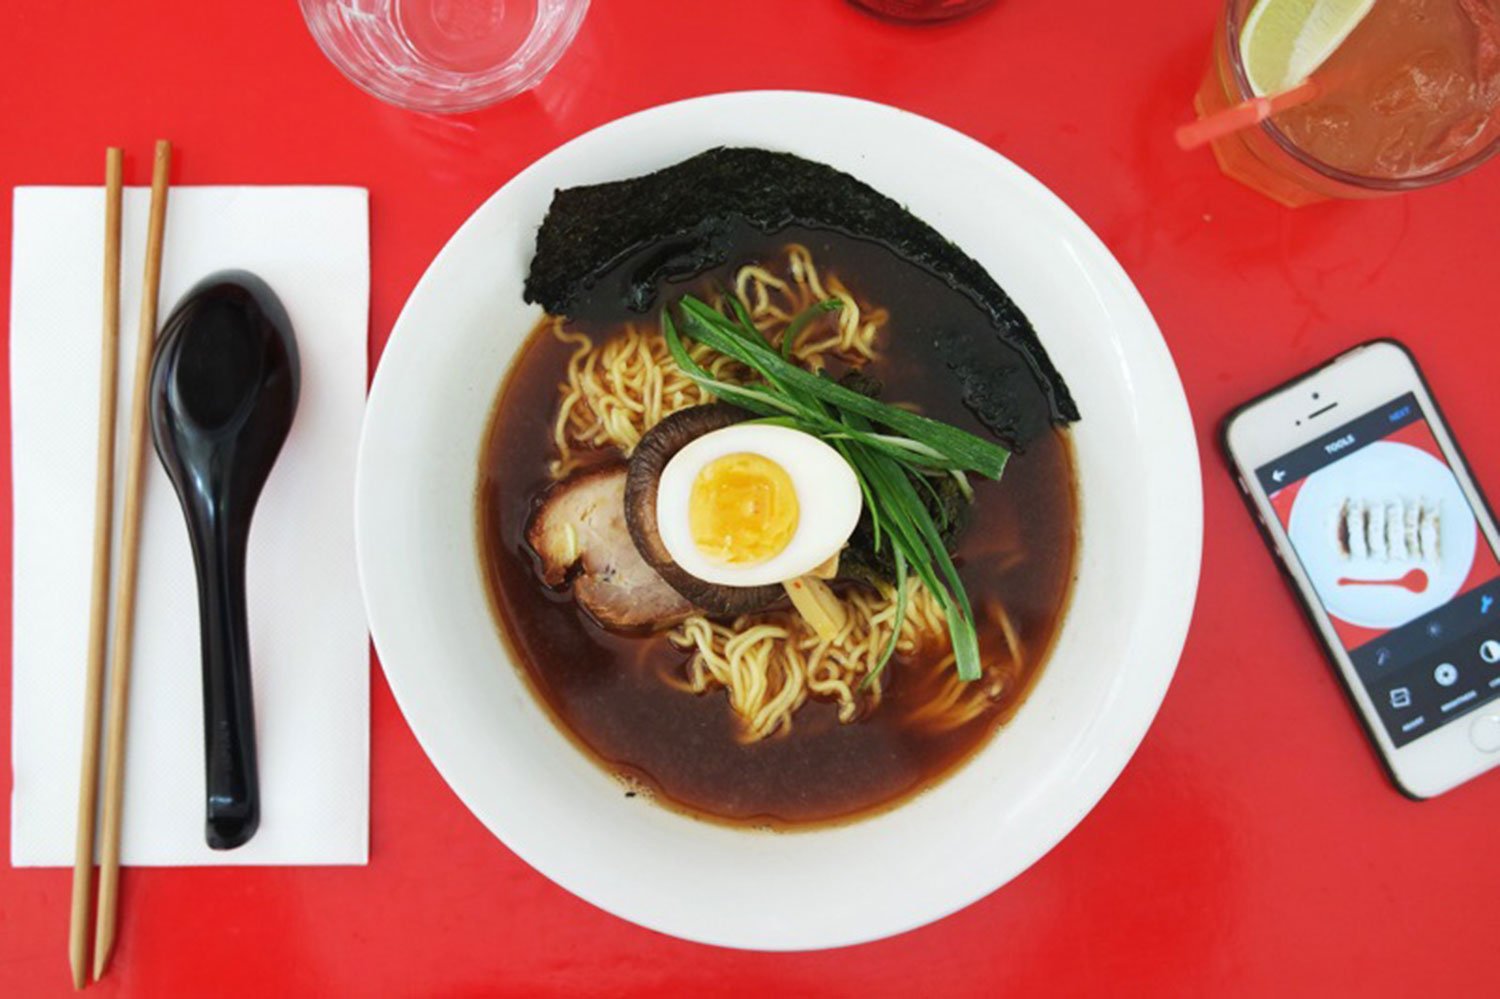 A bowl of "the darkness" ramen from Rising sun workshop, photographed aerially with cutlery and a mobile phone flanking it from either side.